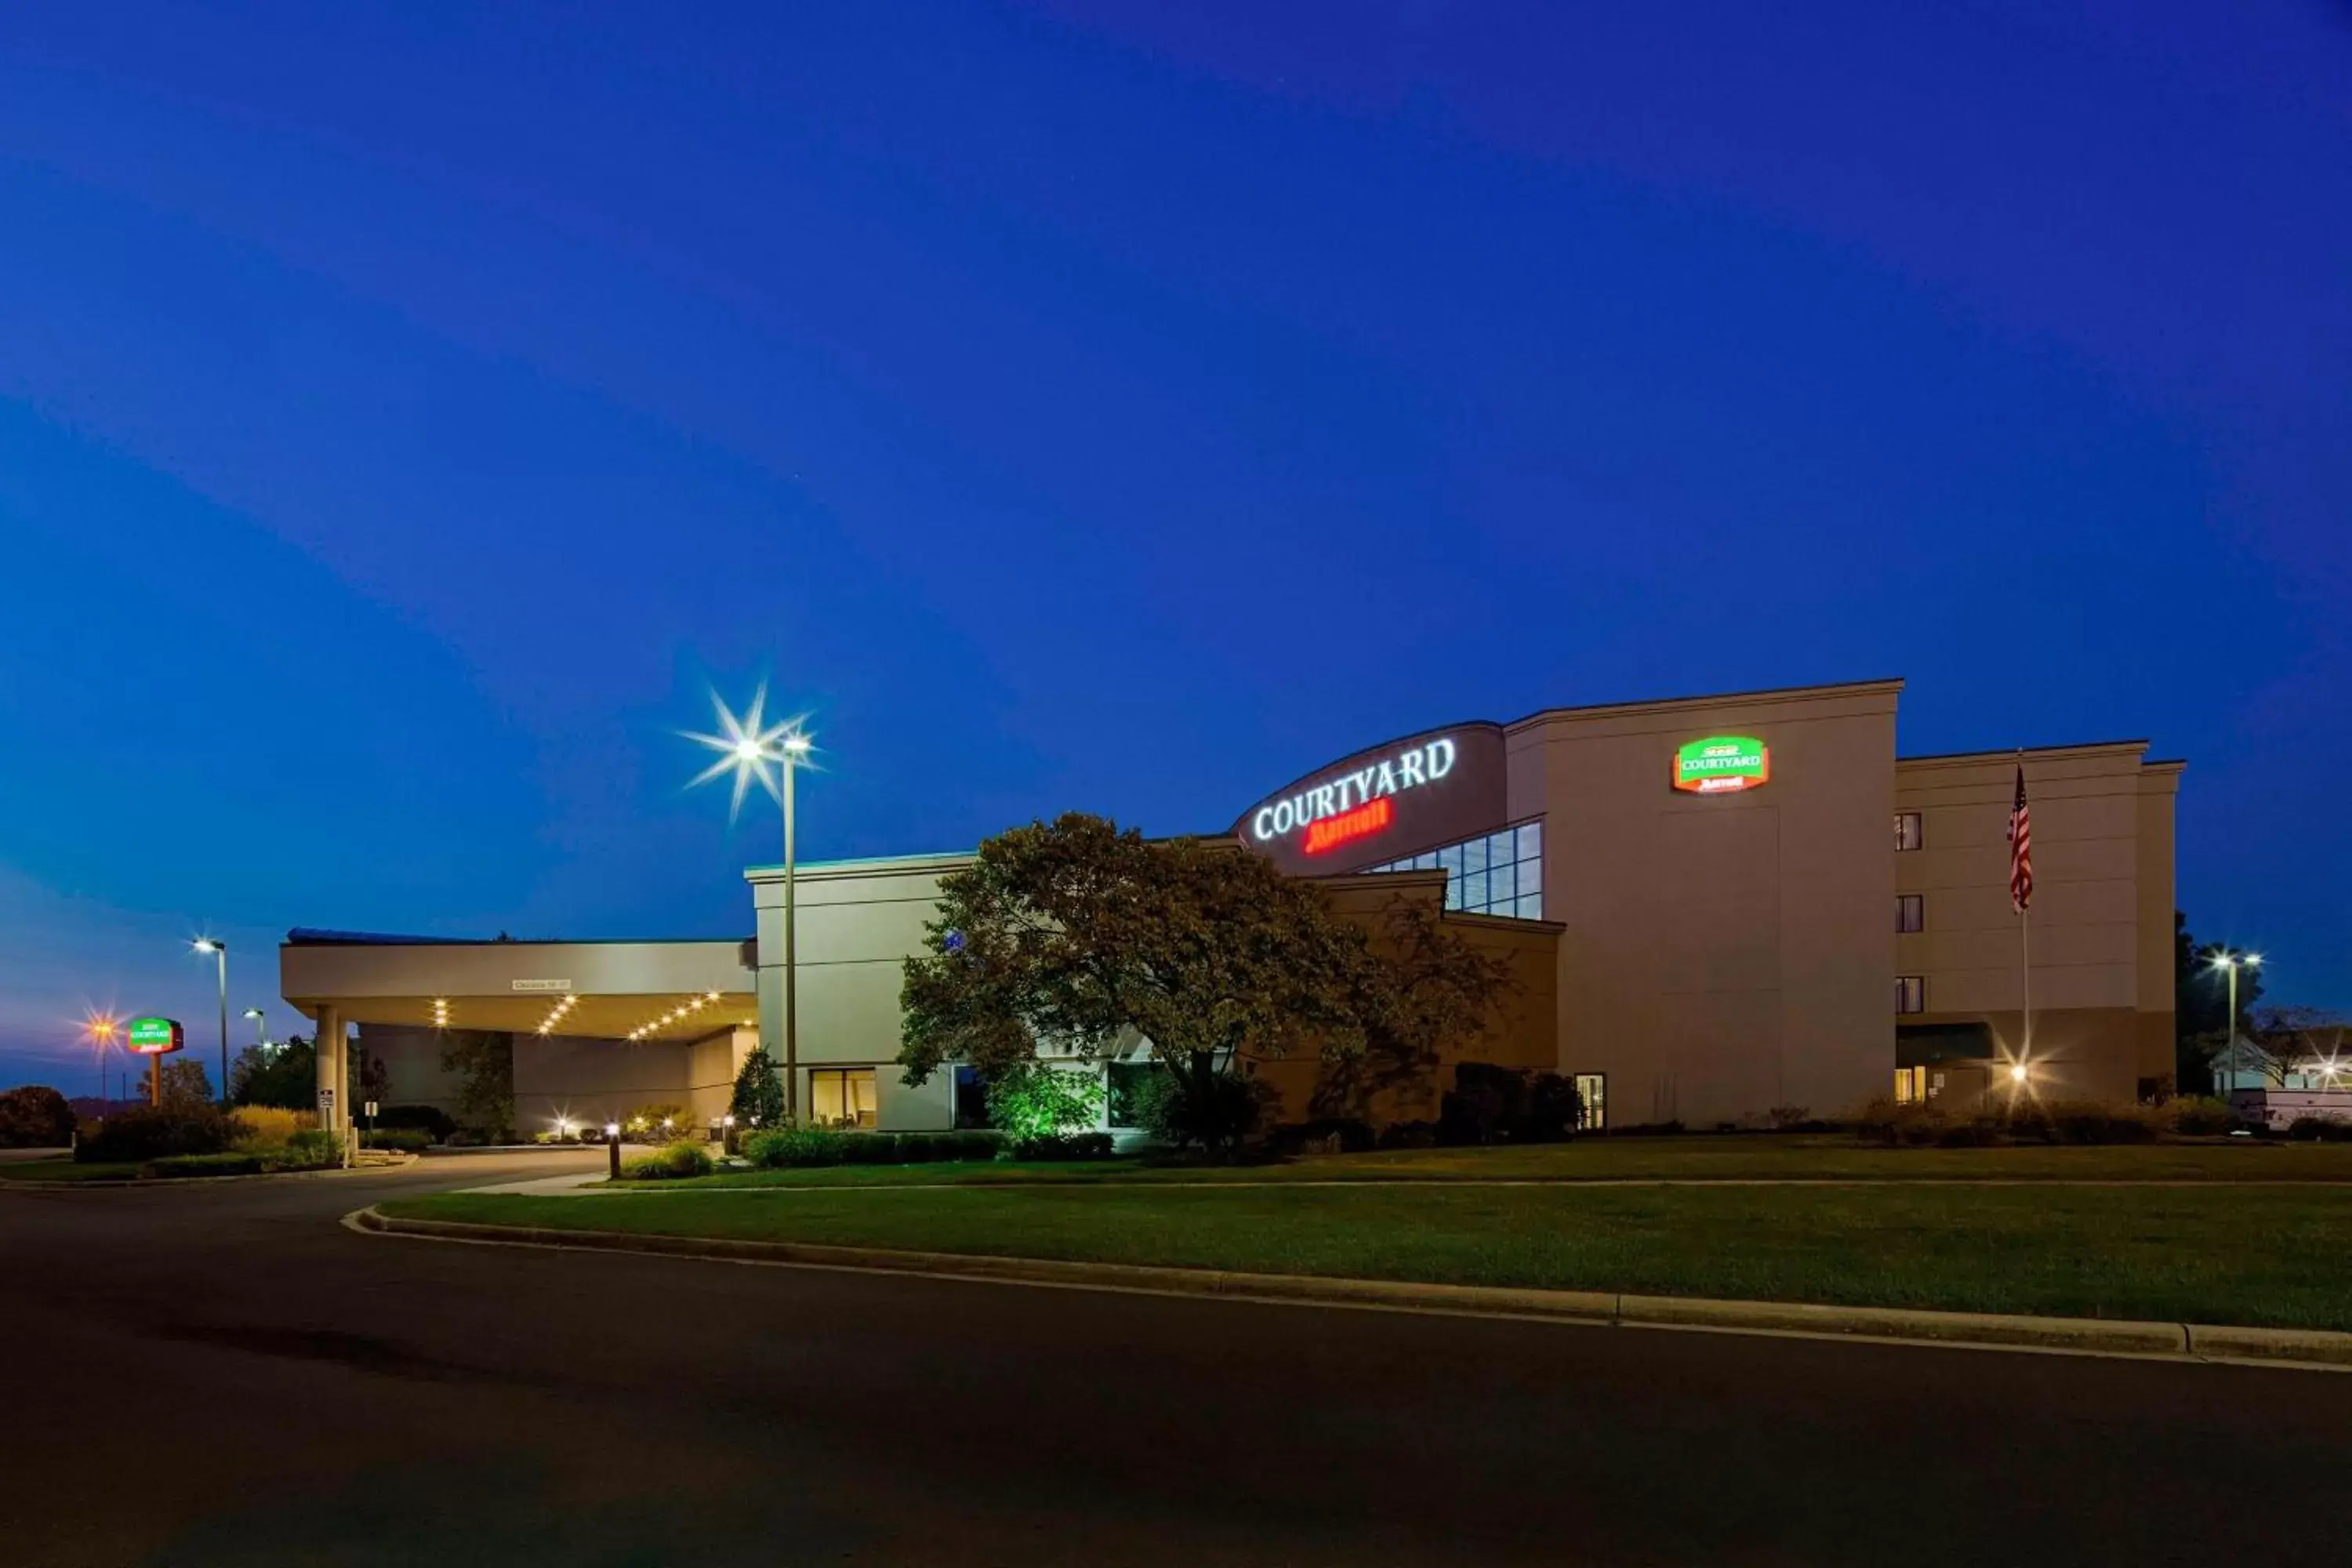 Property Building in Courtyard by Marriott Columbus West/Hilliard